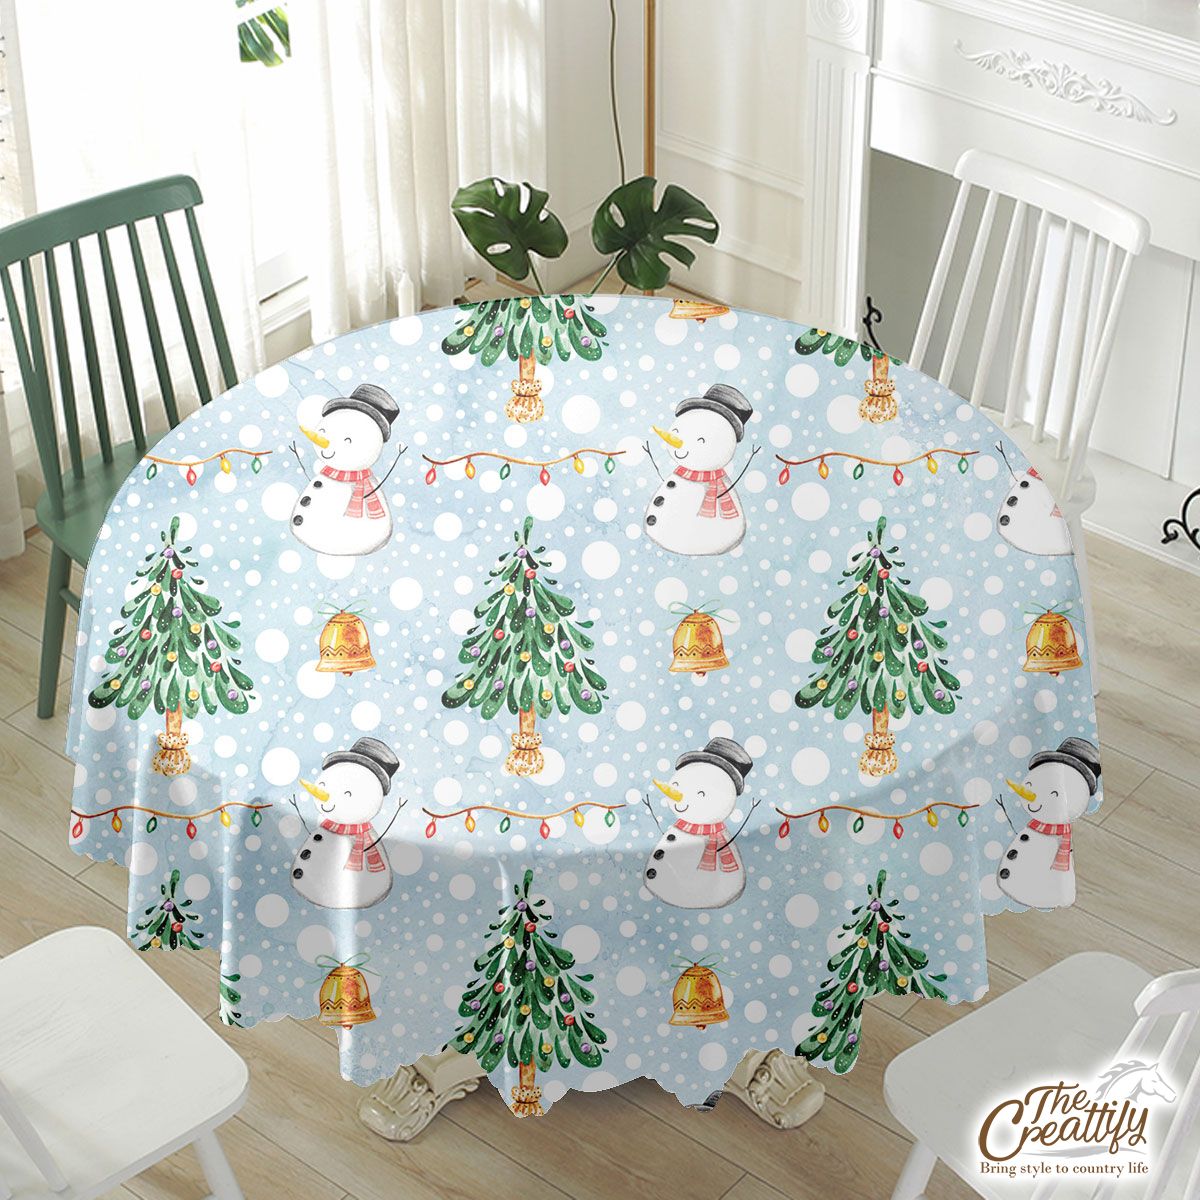 Snowman And Christmas Tree On Snowflake Background Waterproof Tablecloth